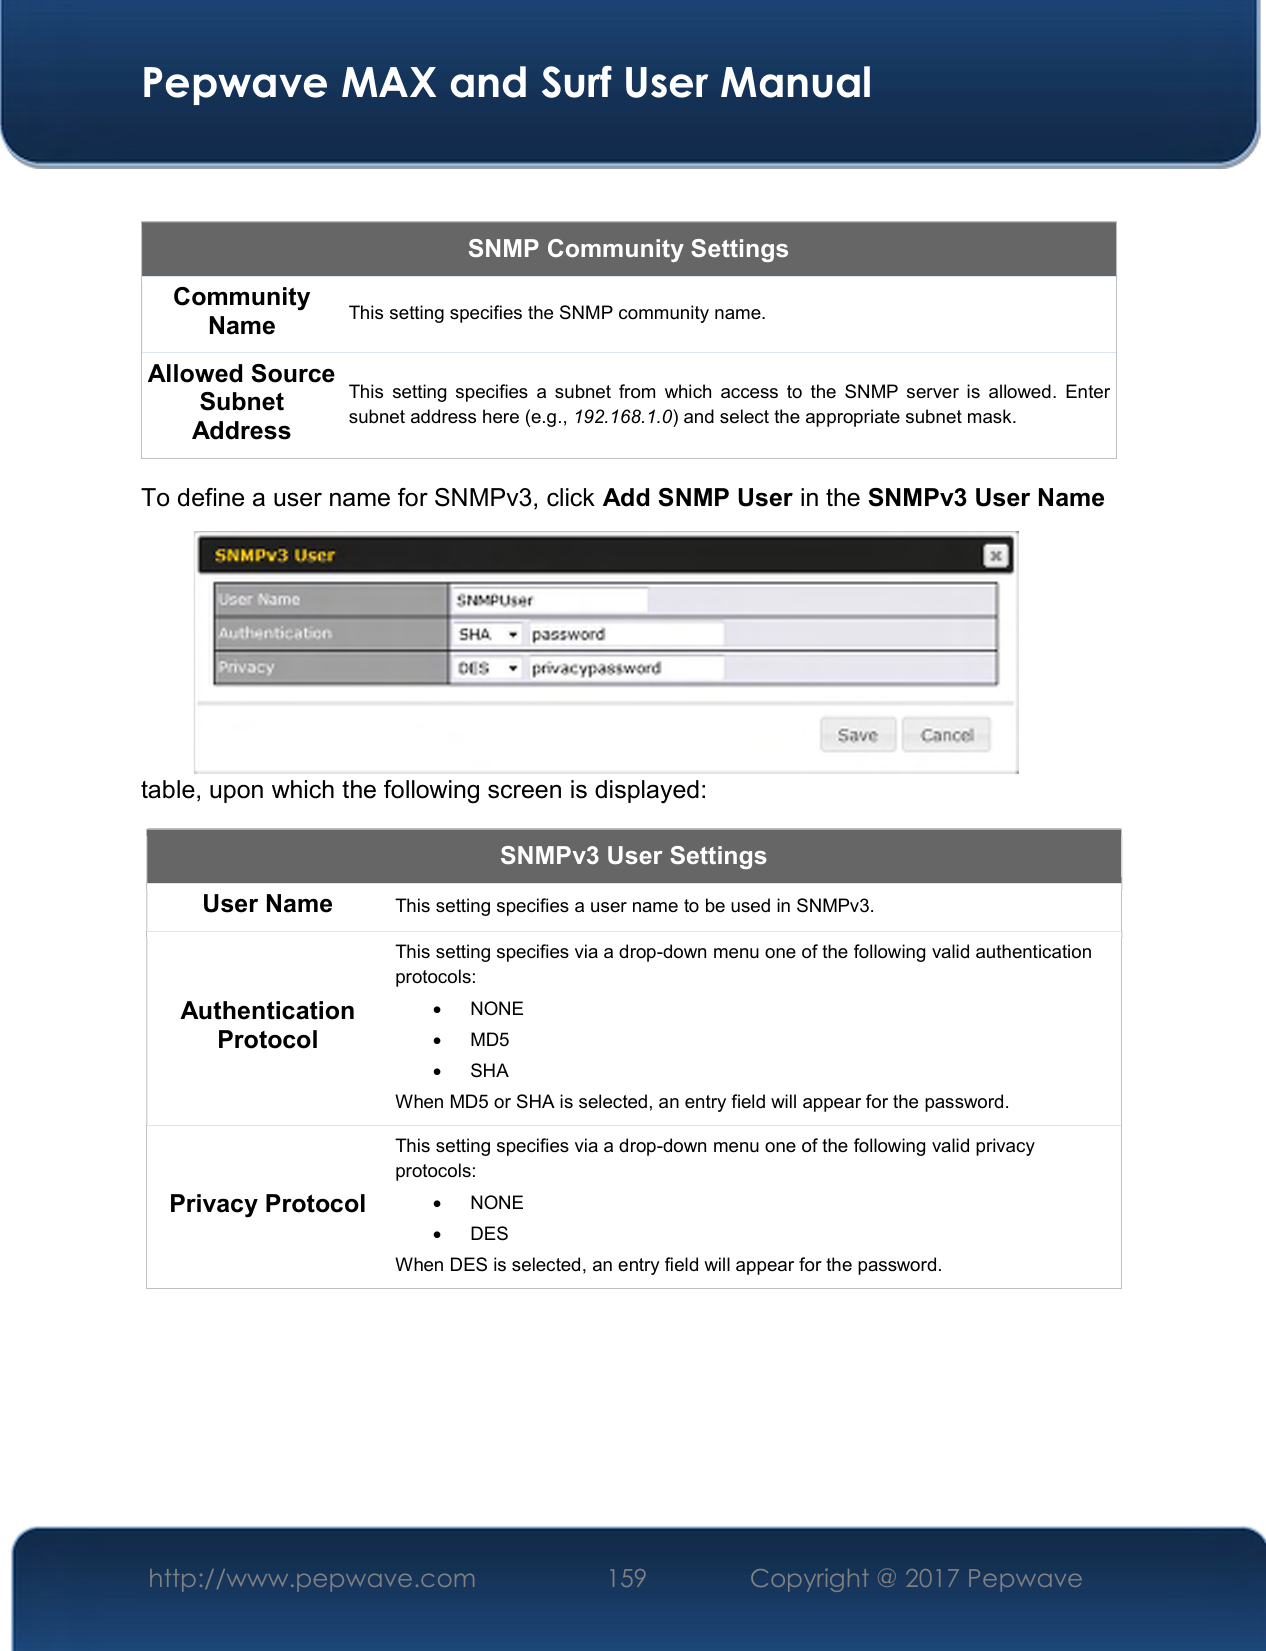  Pepwave MAX and Surf User Manual http://www.pepwave.com  159    Copyright @ 2017 Pepwave    SNMP Community Settings Community Name  This setting specifies the SNMP community name. Allowed Source Subnet Address This  setting specifies  a subnet from  which access  to  the SNMP server  is  allowed.  Enter subnet address here (e.g., 192.168.1.0) and select the appropriate subnet mask. To define a user name for SNMPv3, click Add SNMP User in the SNMPv3 User Name table, upon which the following screen is displayed: SNMPv3 User Settings User Name This setting specifies a user name to be used in SNMPv3. Authentication Protocol This setting specifies via a drop-down menu one of the following valid authentication protocols:    NONE   MD5    SHA When MD5 or SHA is selected, an entry field will appear for the password. Privacy Protocol This setting specifies via a drop-down menu one of the following valid privacy protocols:    NONE    DES When DES is selected, an entry field will appear for the password.  